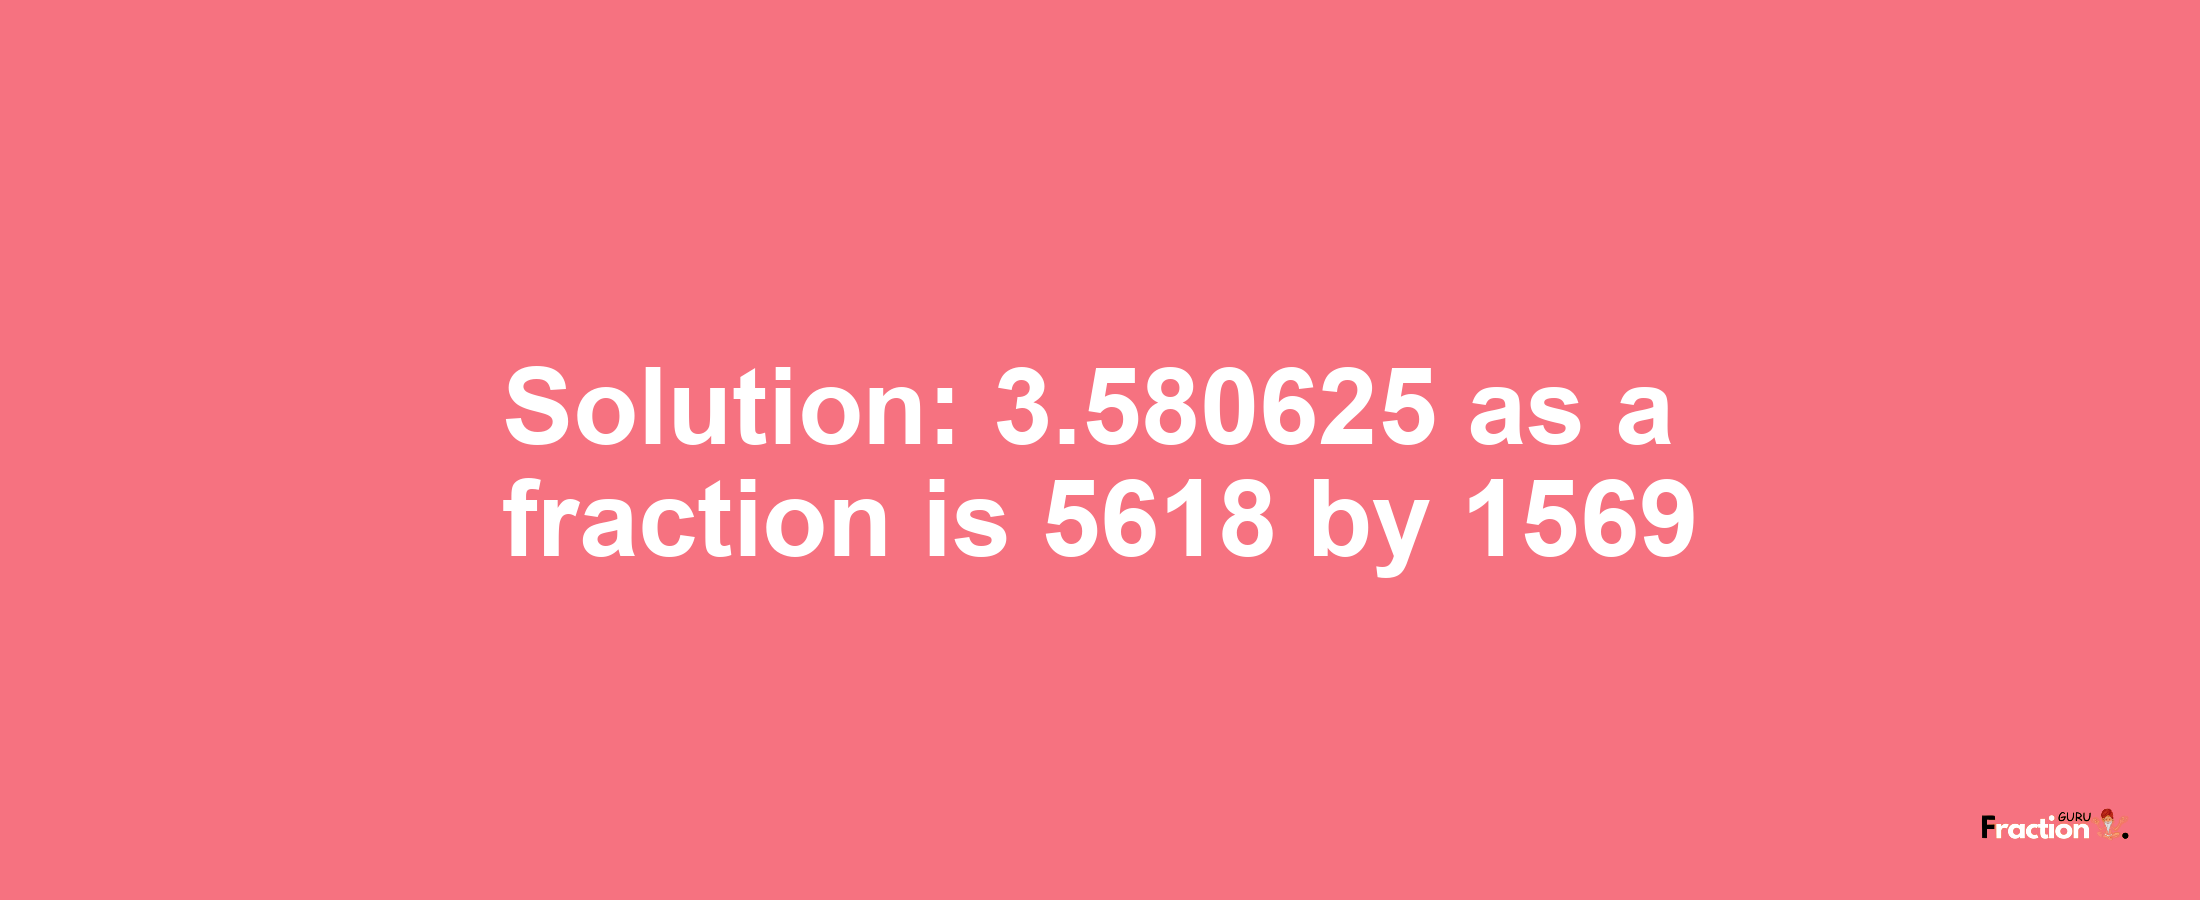 Solution:3.580625 as a fraction is 5618/1569